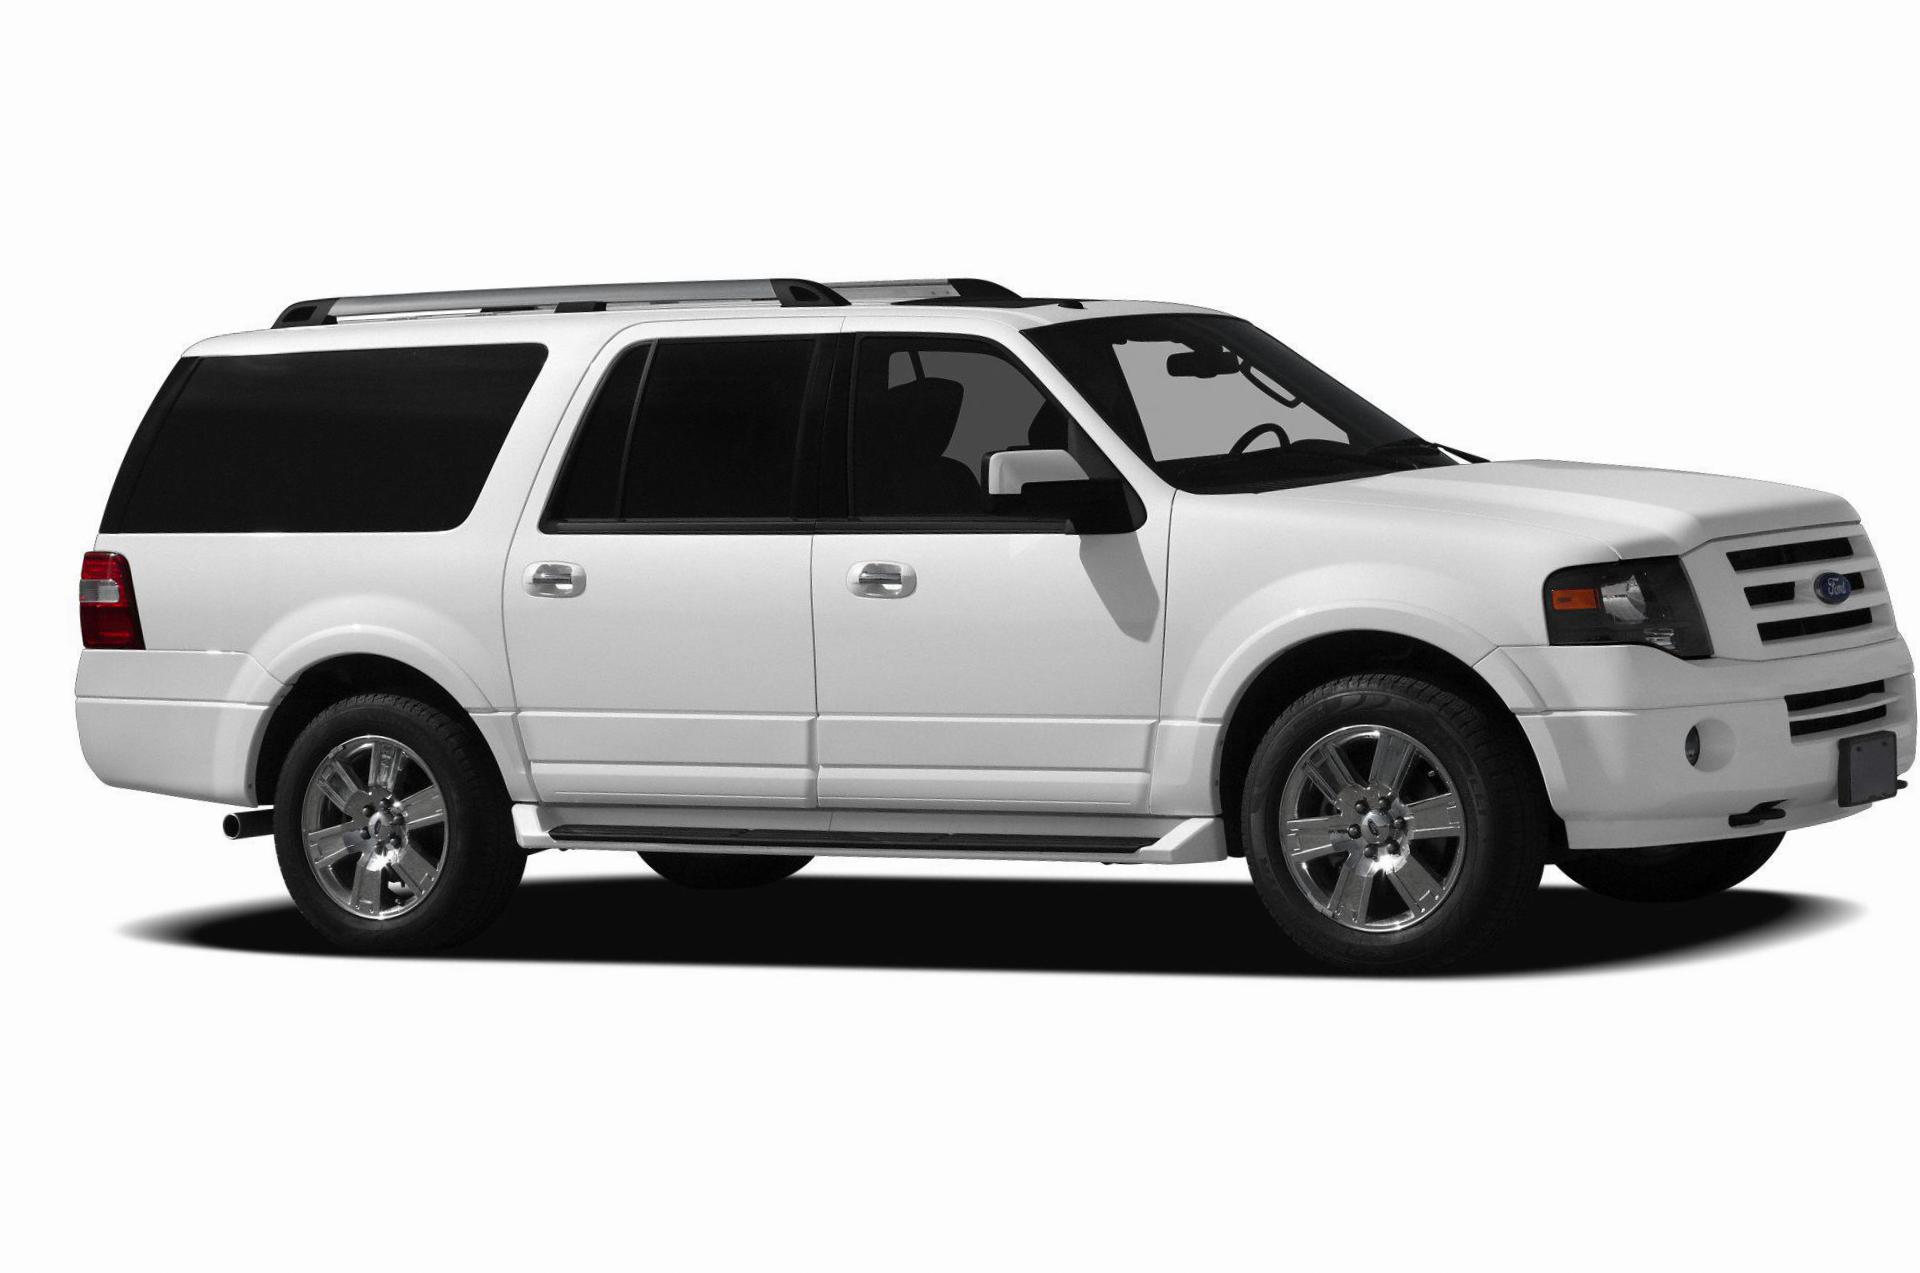 Ford Expedition Photos and Specs. Photo: Expedition Ford for sale and
22 perfect photos of Ford